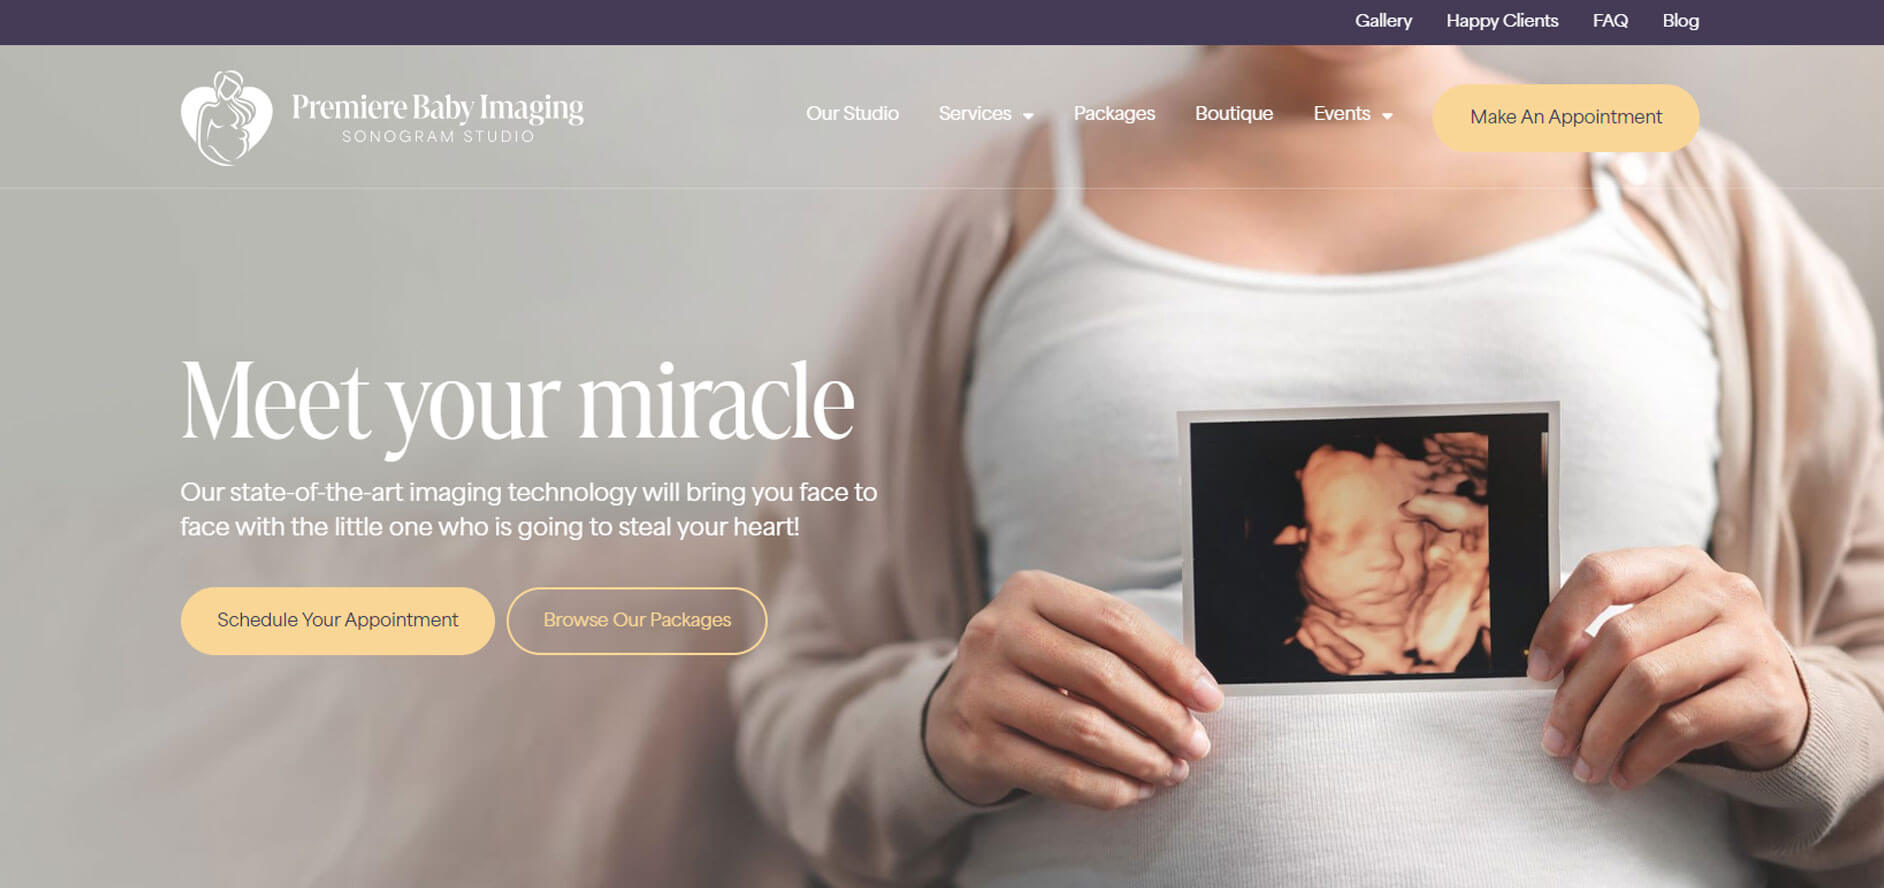 premiere baby imaging web page